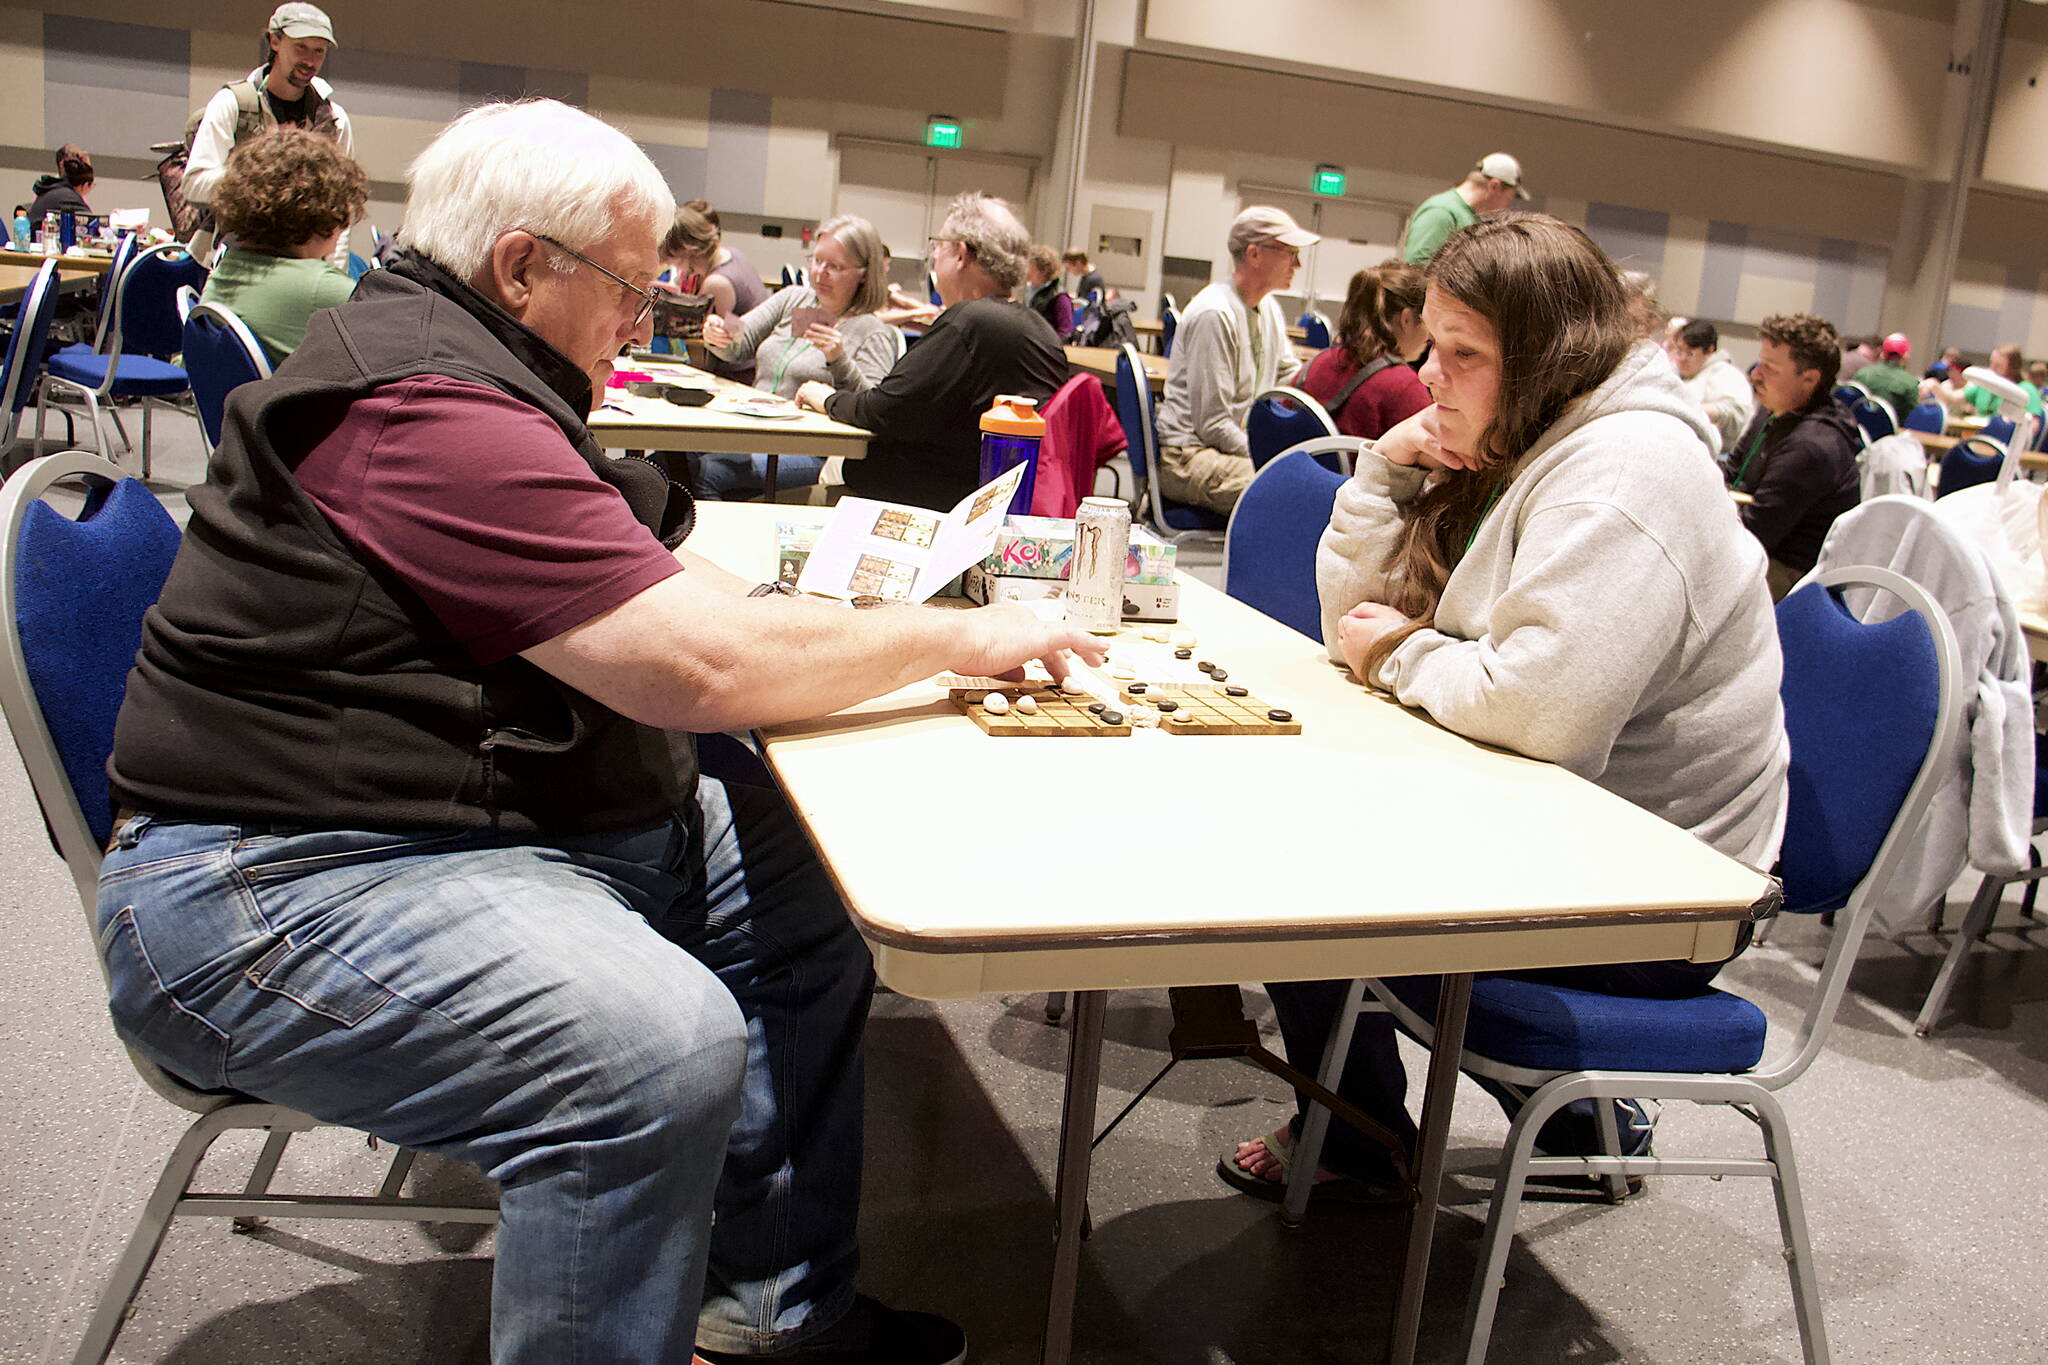 Bryan Wilson and Courtney Olivia engage in the ancient game of Shōbu on Saturday during the annual Platypus-Con Board and Card Game Extravaganza at Centennial Hall. The event continues through Sunday. (Mark Sabbatini / Juneau Empire)